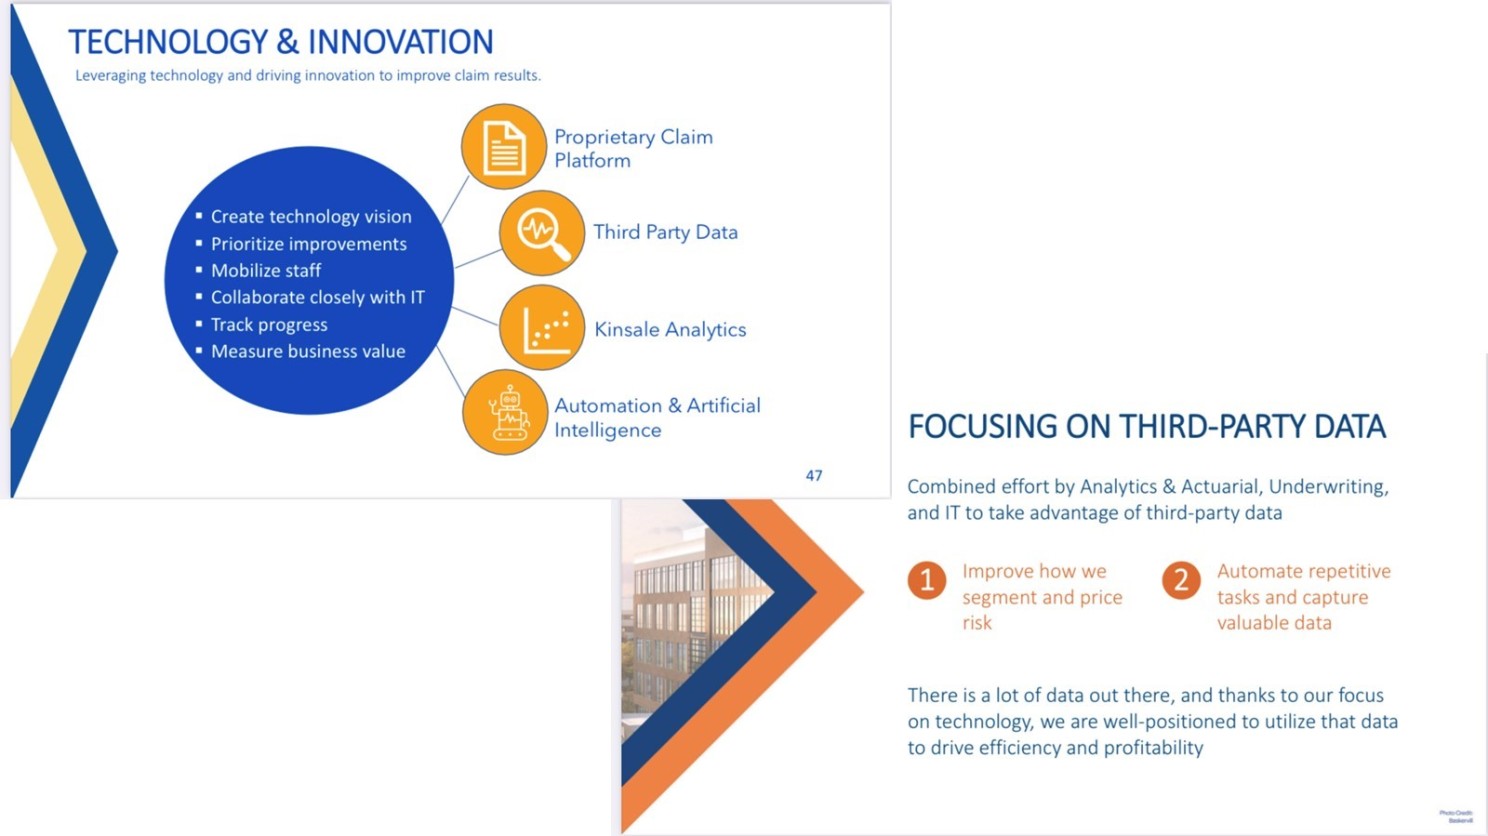 Technology & Innovation and Focusing on Third Party Data Powerpoint slides